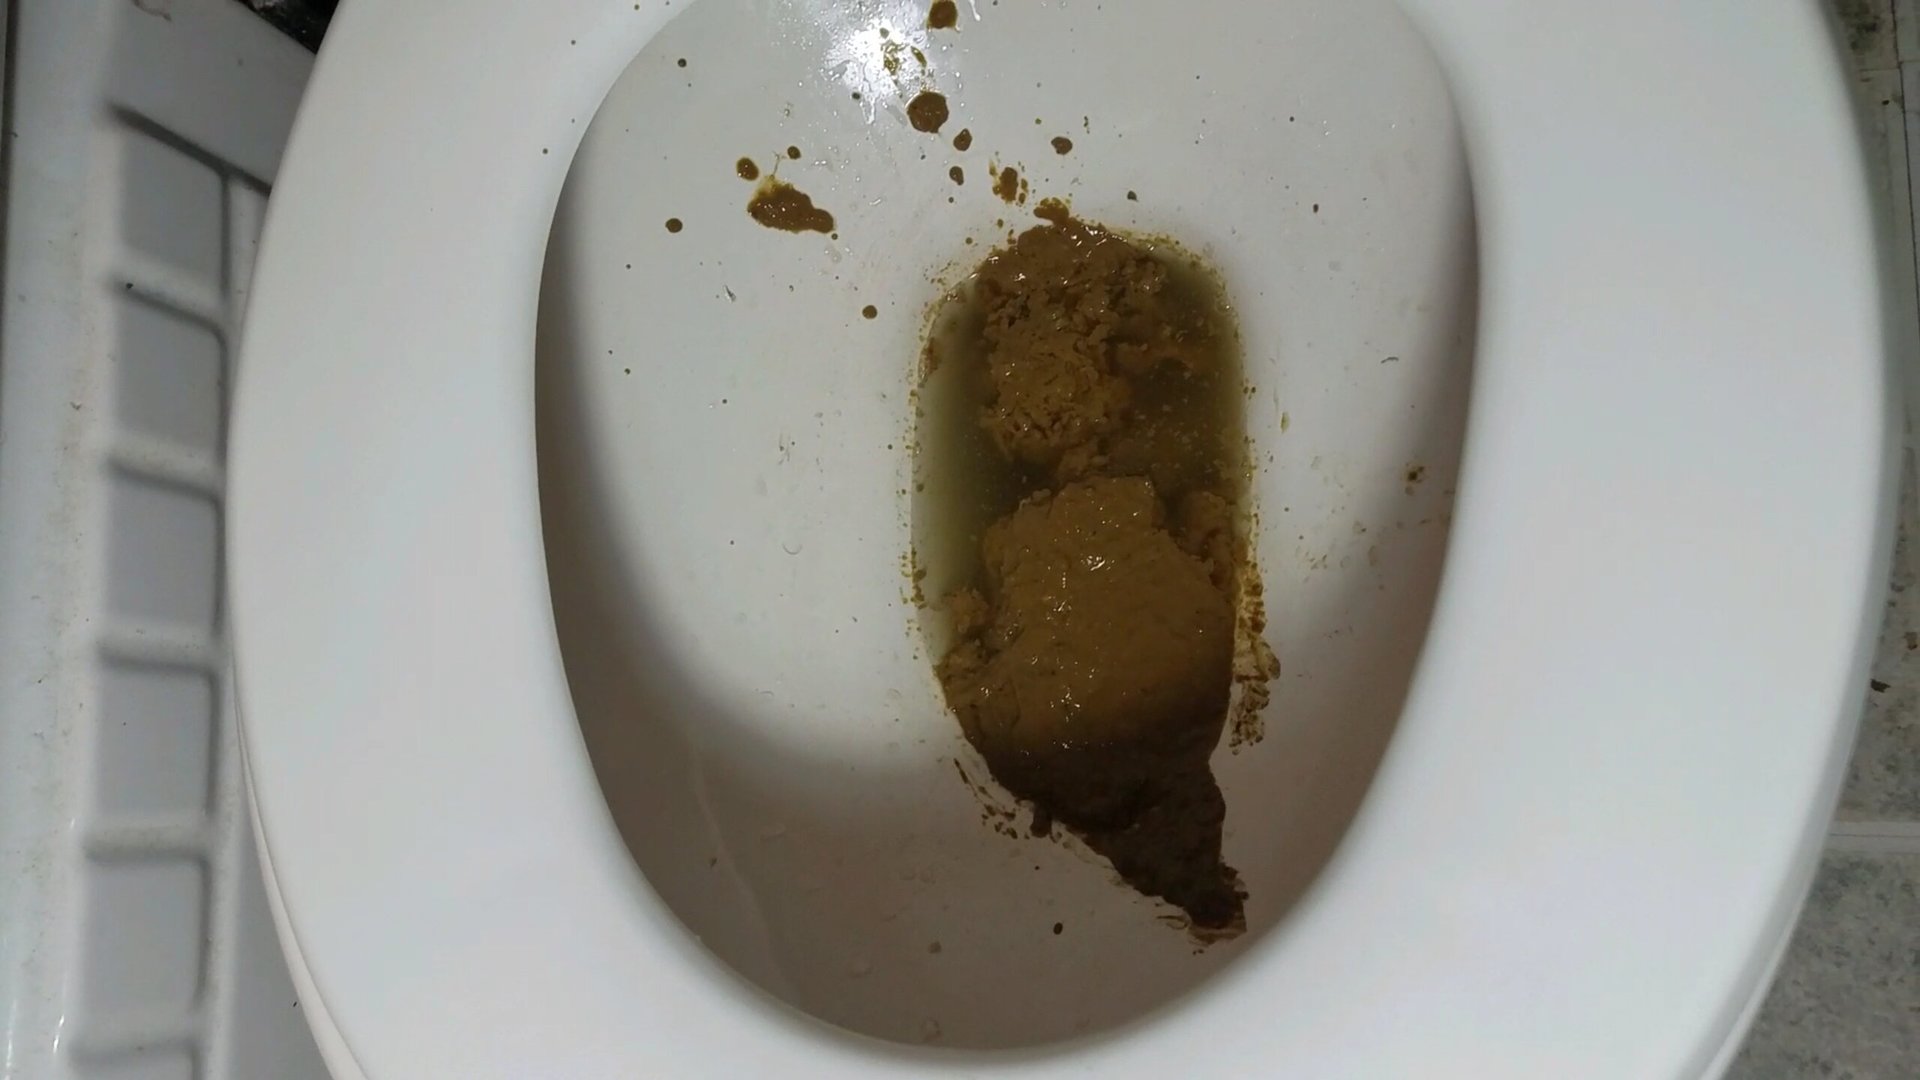 Bbw sloppy shit in toilet. - ScatFap.com - scat porn search - FREE videos  of extreme kaviar and copro sex, dirty shit eating and smearing